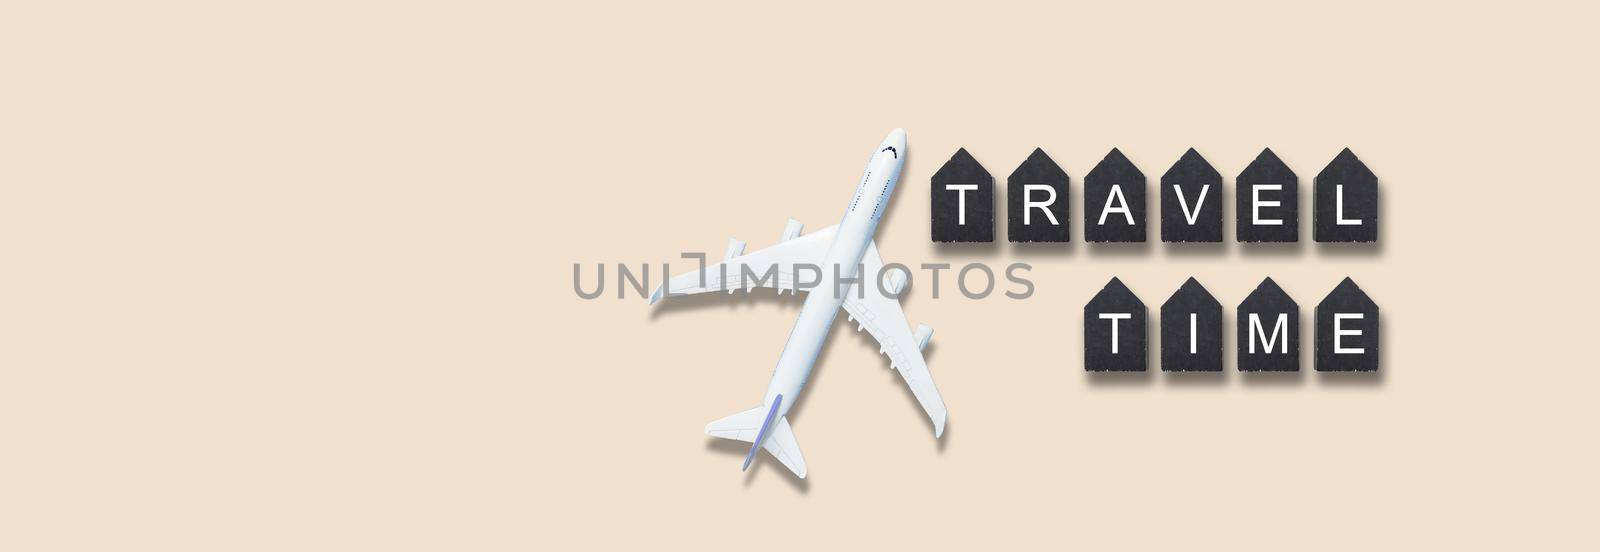 Airplane model. White plane on background. Travel vacation concept. Summer background. Flat lay, top view, copy space. by Andelov13